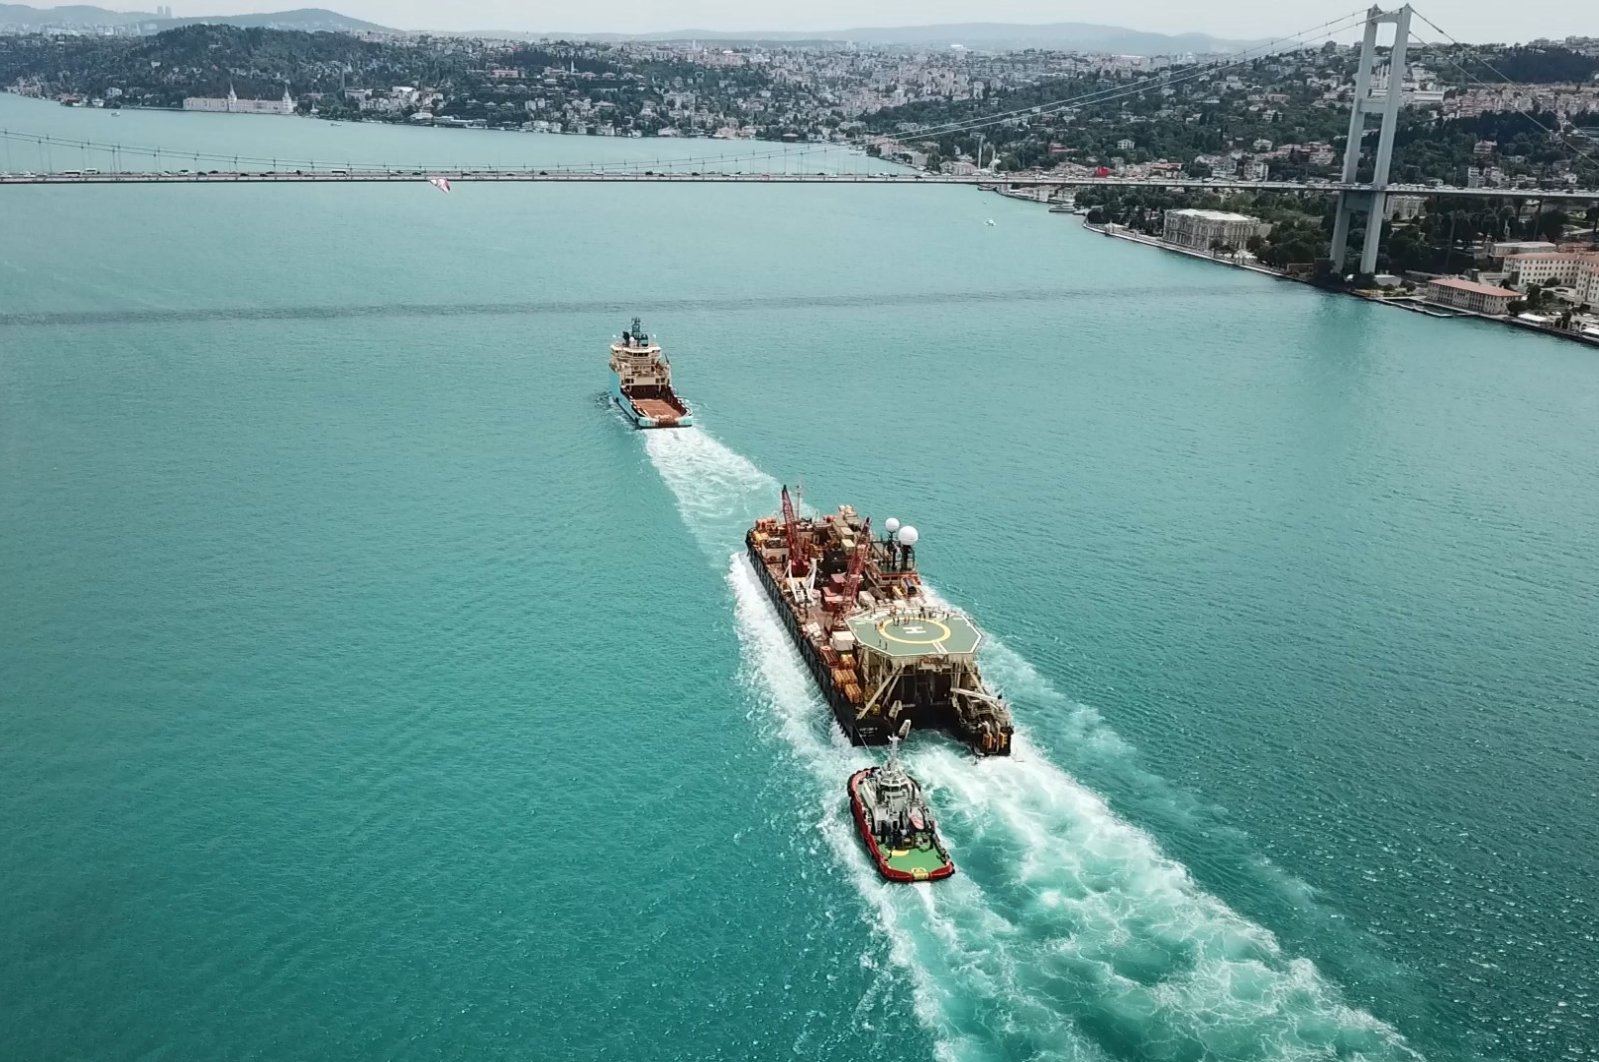 Pipelay vessel Castoro 10 sails in the Bosporus on its way to the Black Sea, Istanbul, Turkey, June 6, 2022. (DHA Photo)